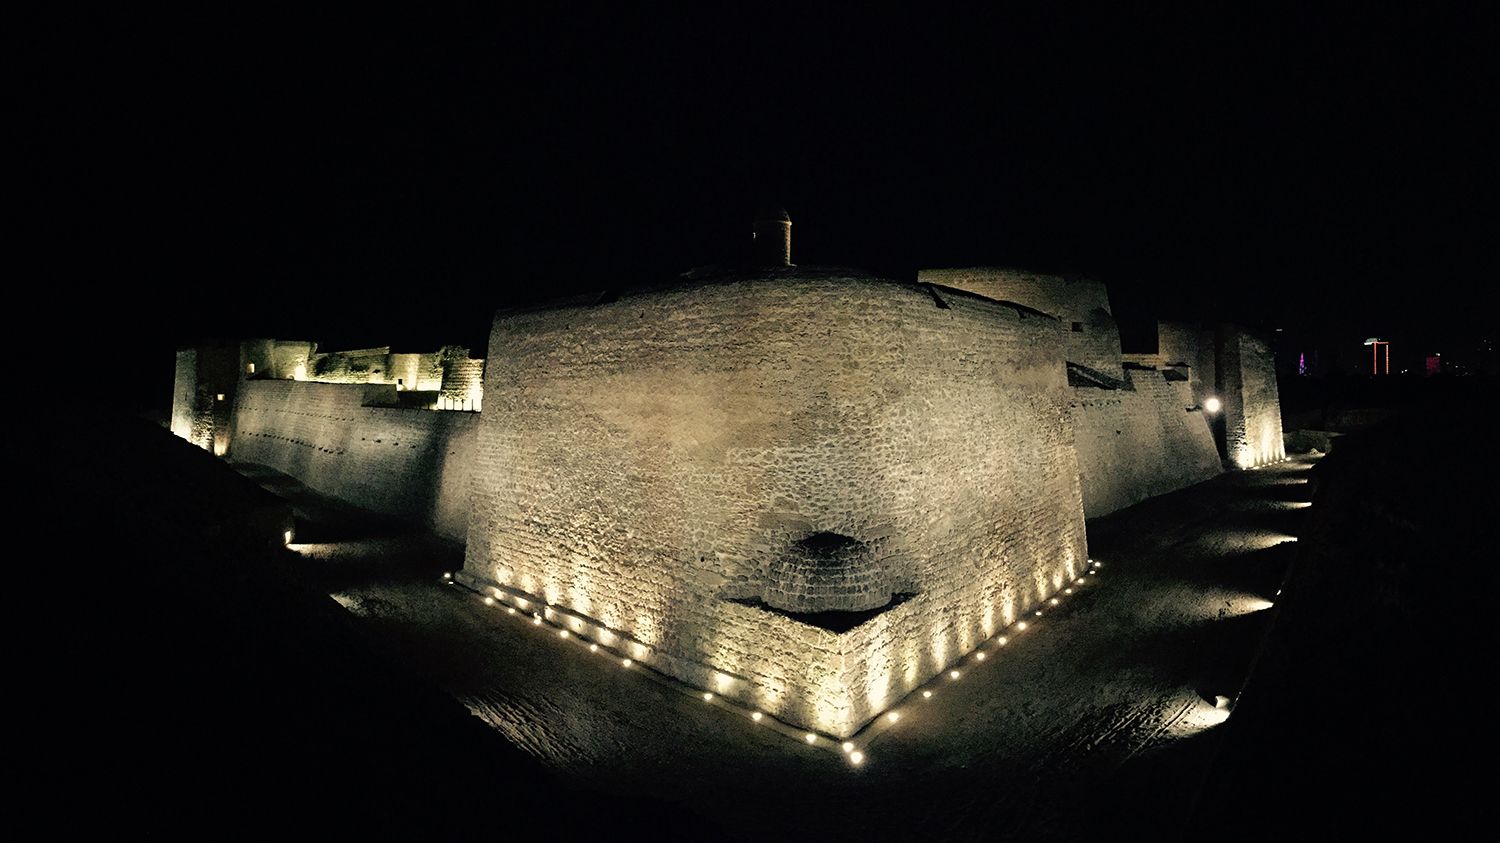 Bahrain fort, believed to be founded in 2300 BC!